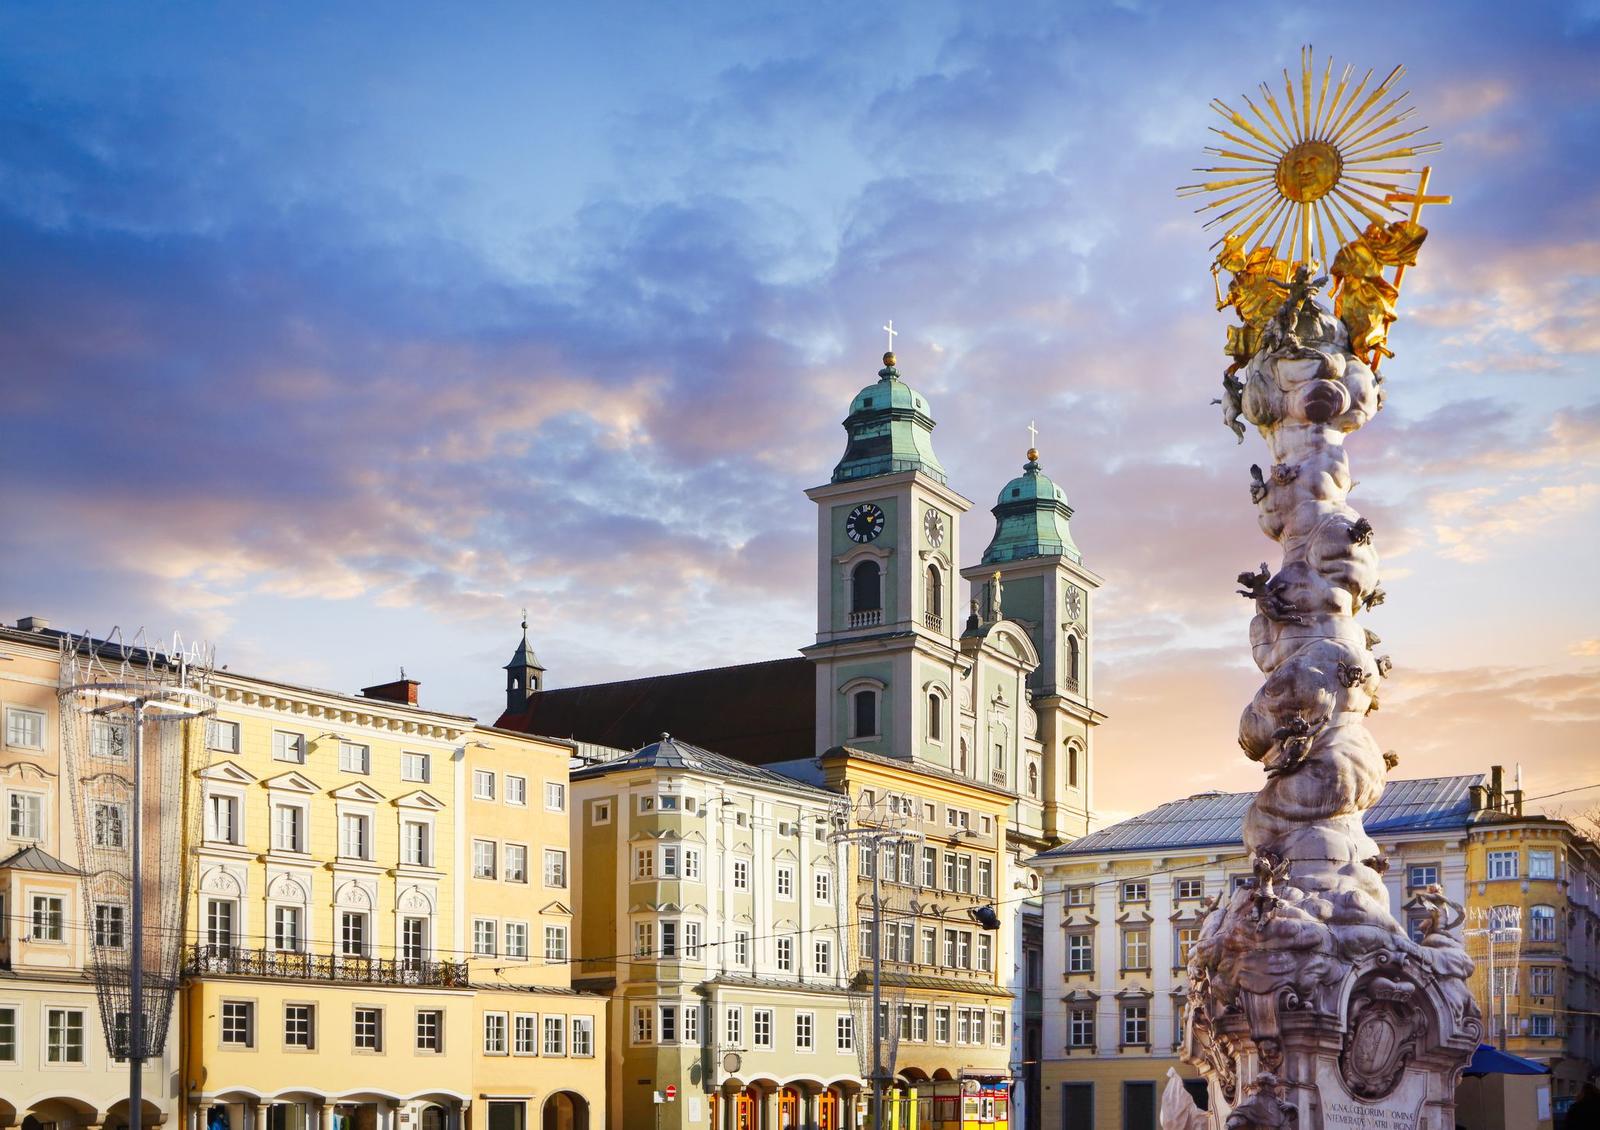 Main square in Linz with Alter Dom and Holy Trinity column